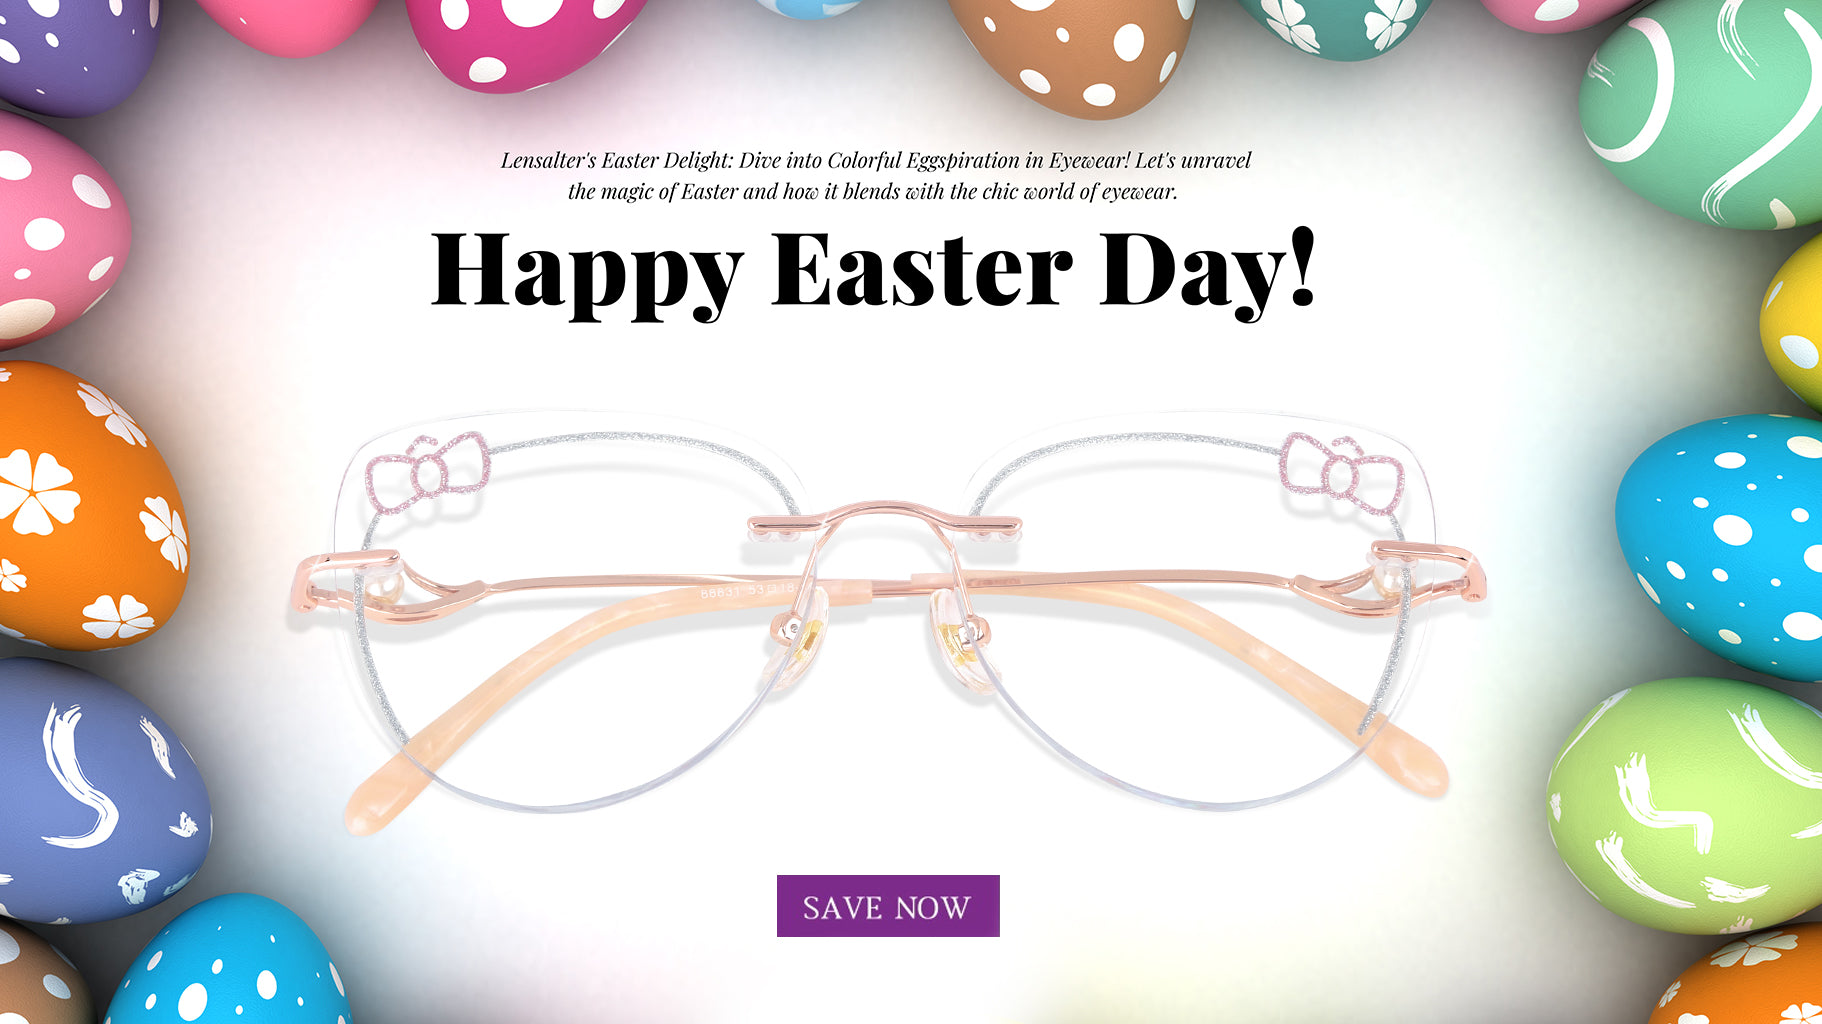 Lensalter's Easter Delight: Dive into Colorful Eggspiration in Eyewear!